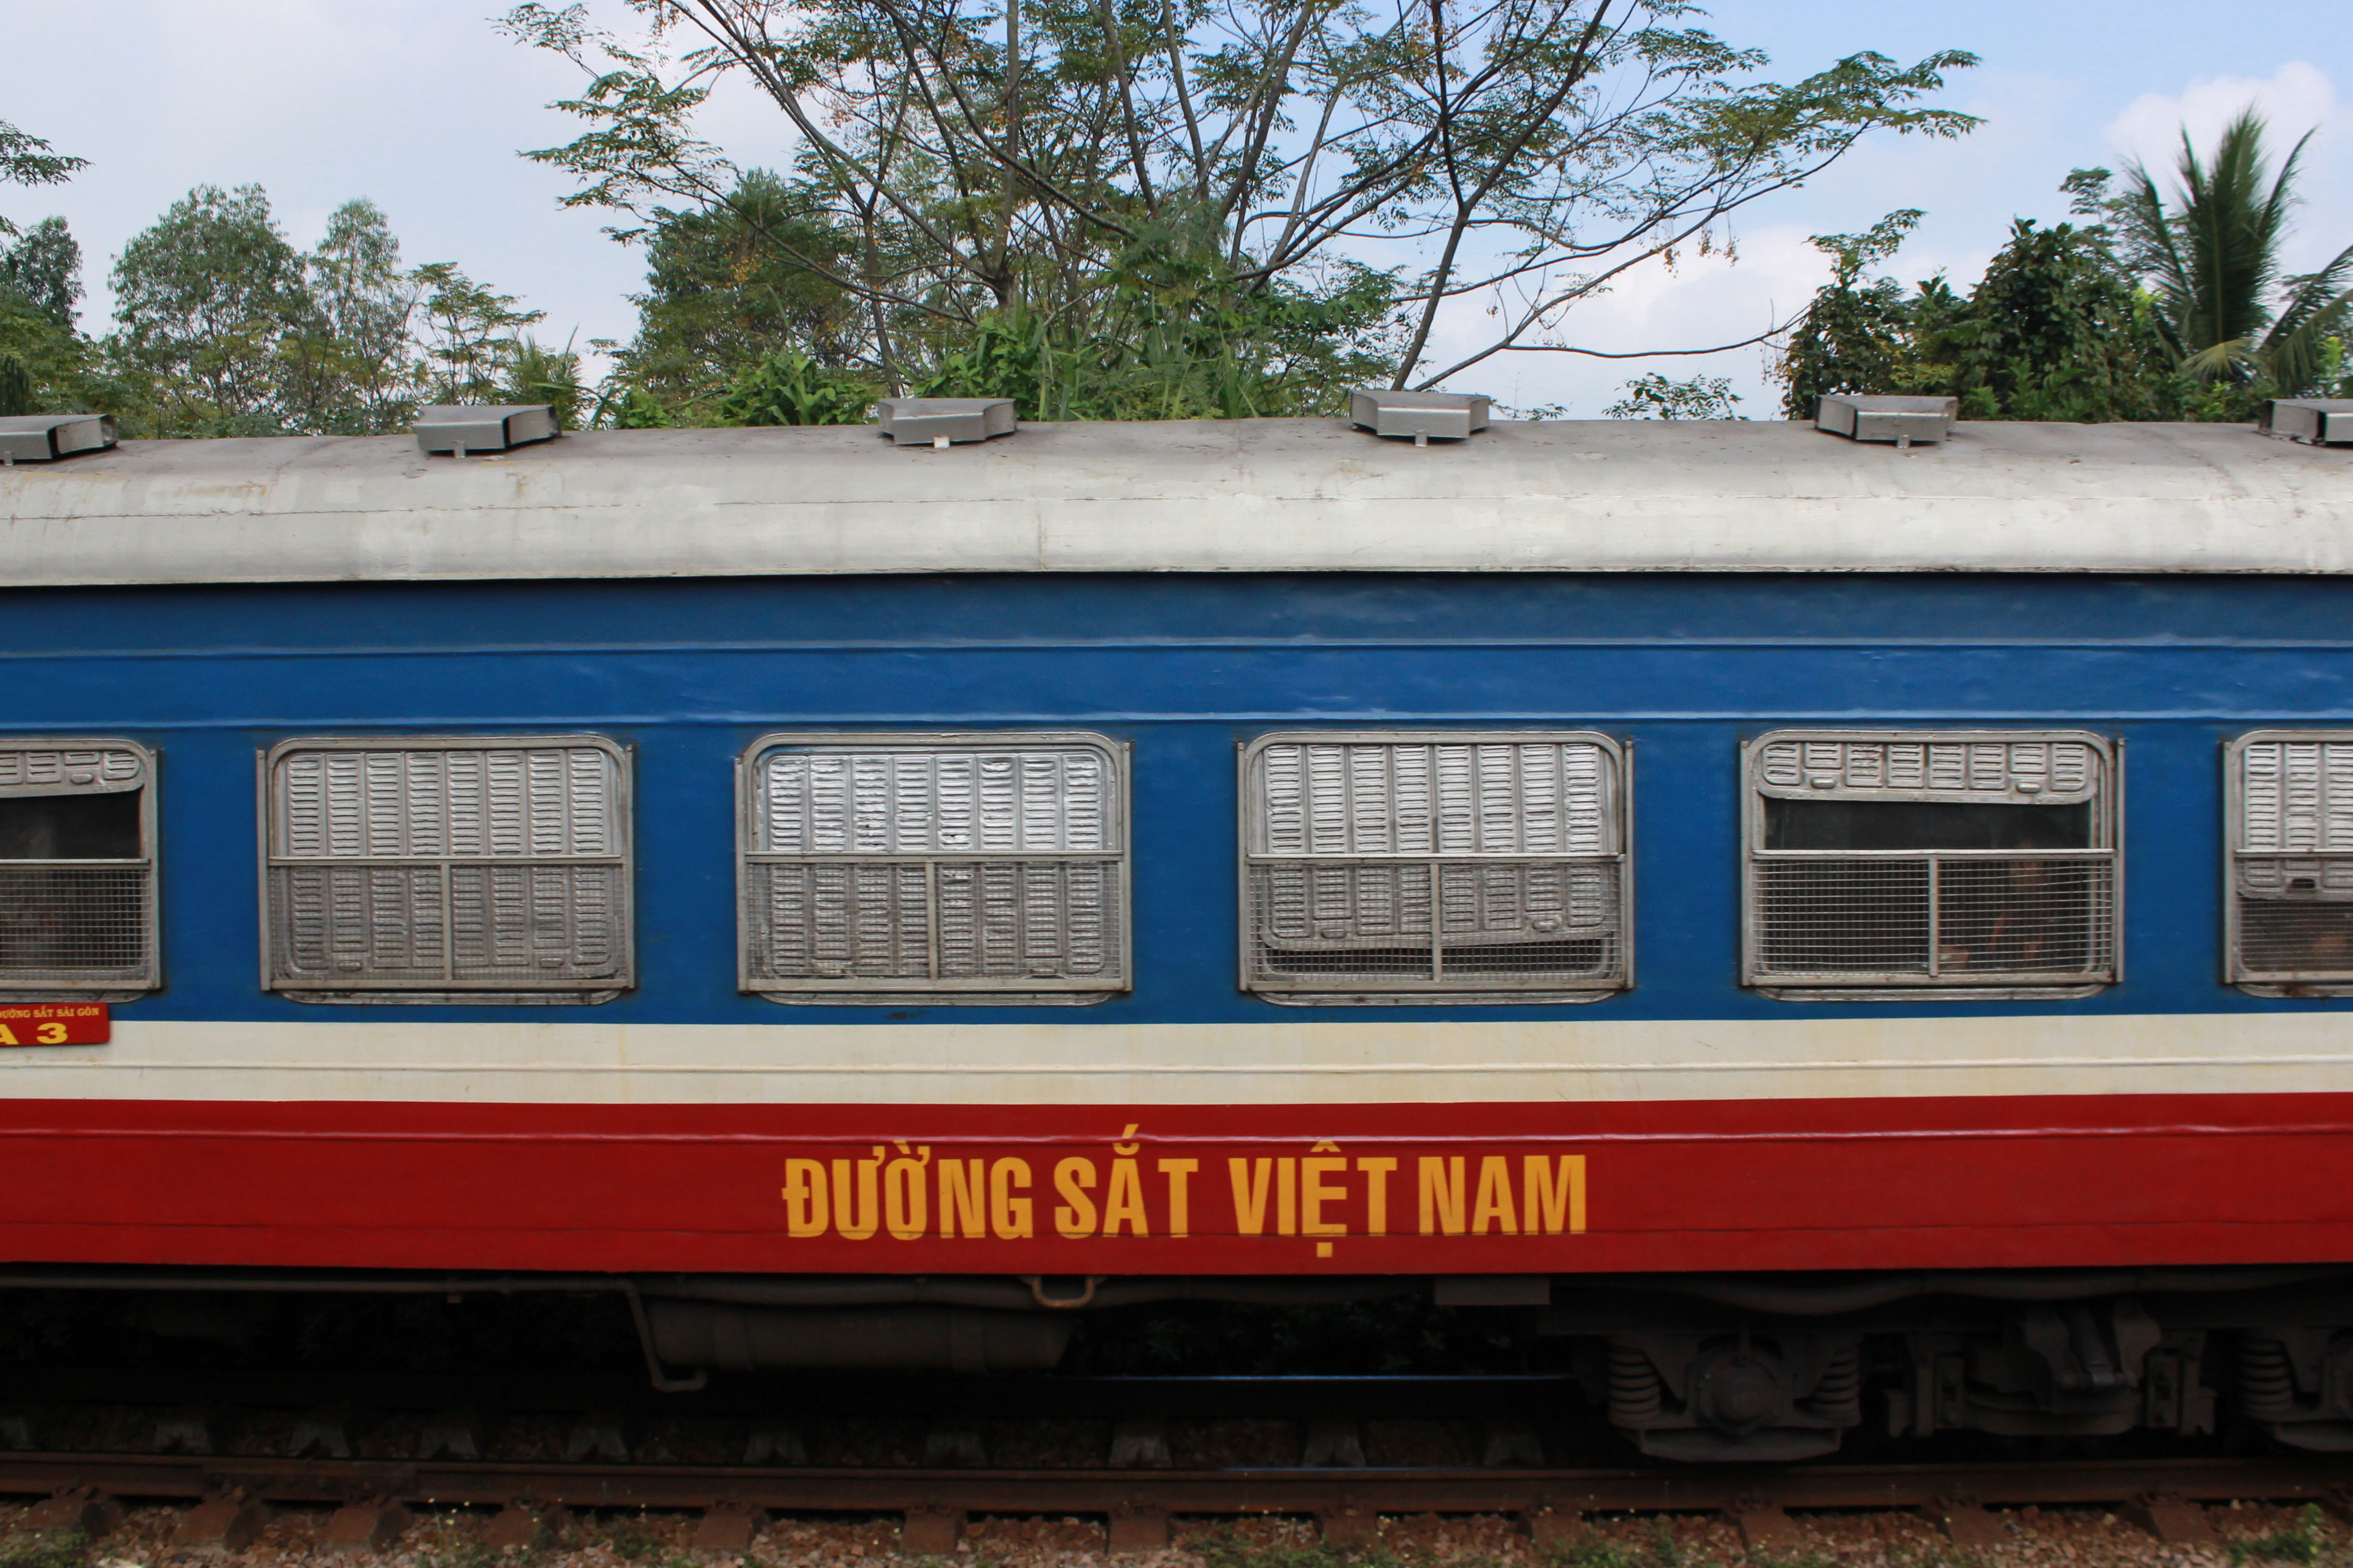 <p>The Trans-Indochinois debuted in French colonial Asia 80 years ago and 40 years later it became the Reunification Express. Today it connects Hanoi with Ho Chi Minh City via 34 hours of tooth-rattling track. Why do so many people opt for the train when flights are cheaper and faster? </p>